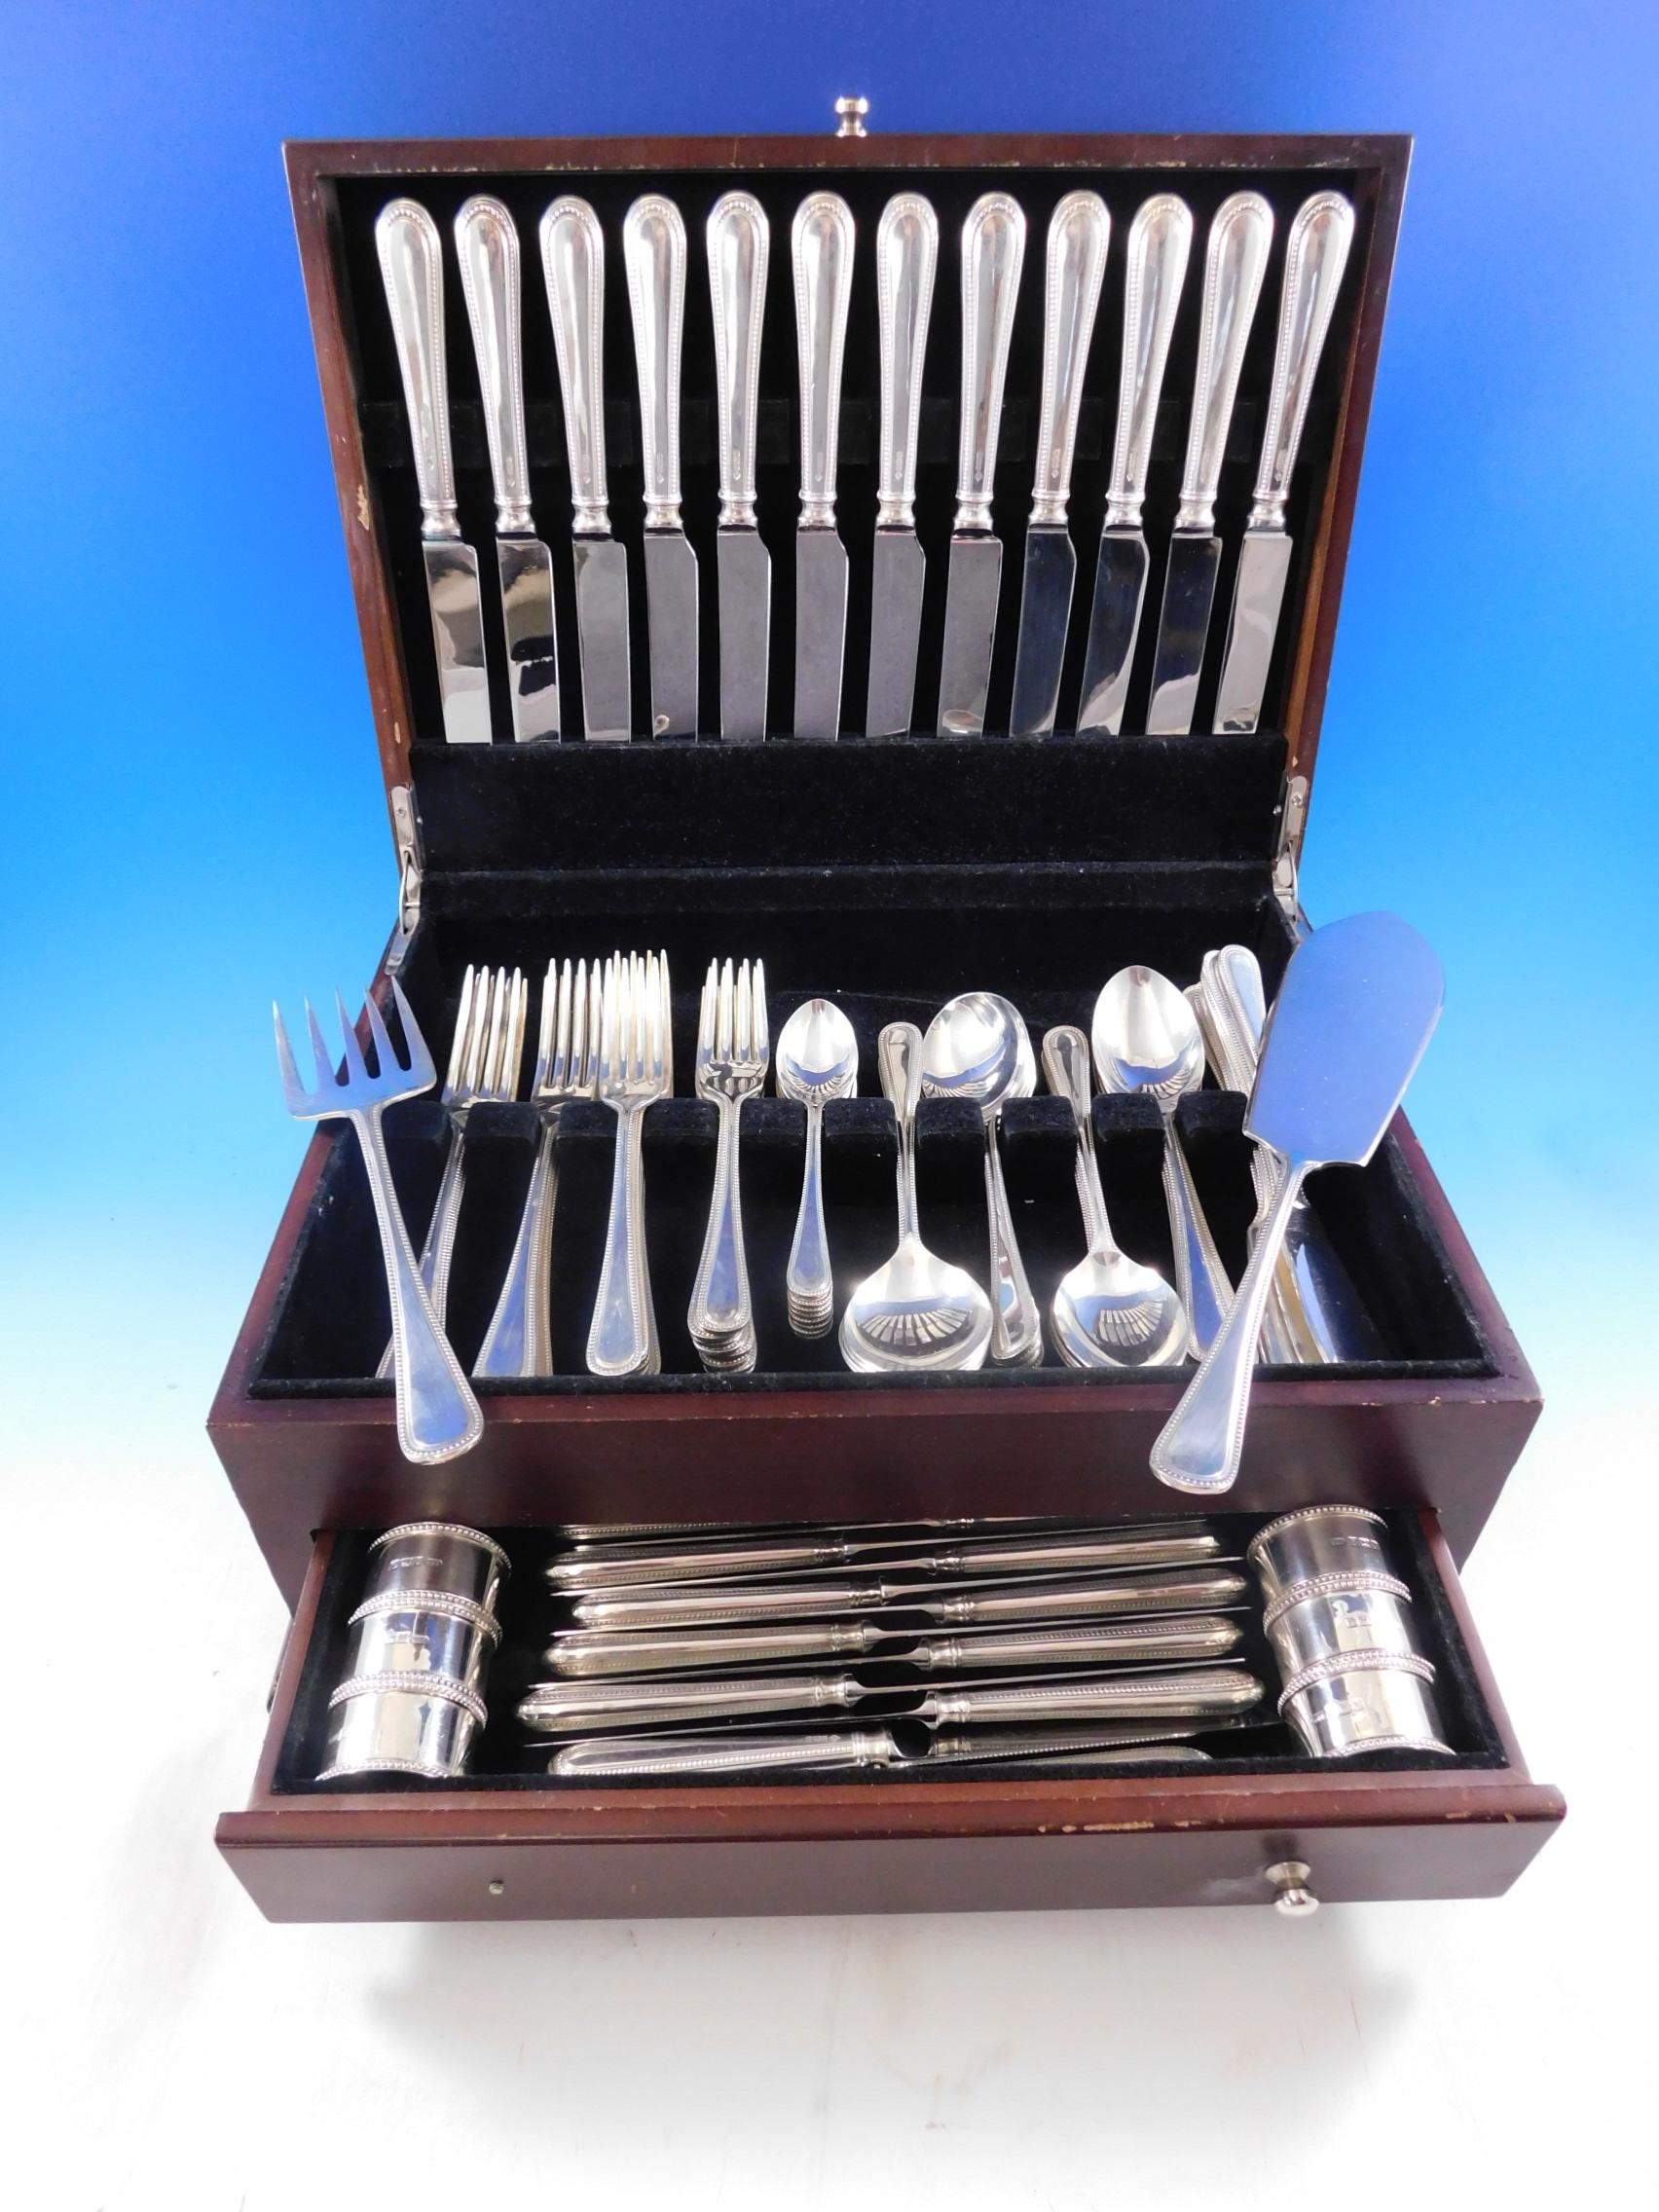 Outstanding bead - round by Carrs - Sheffield England sterling silver flatware set - 87 pieces. This set includes:


12 dinner knives, 9 3/4